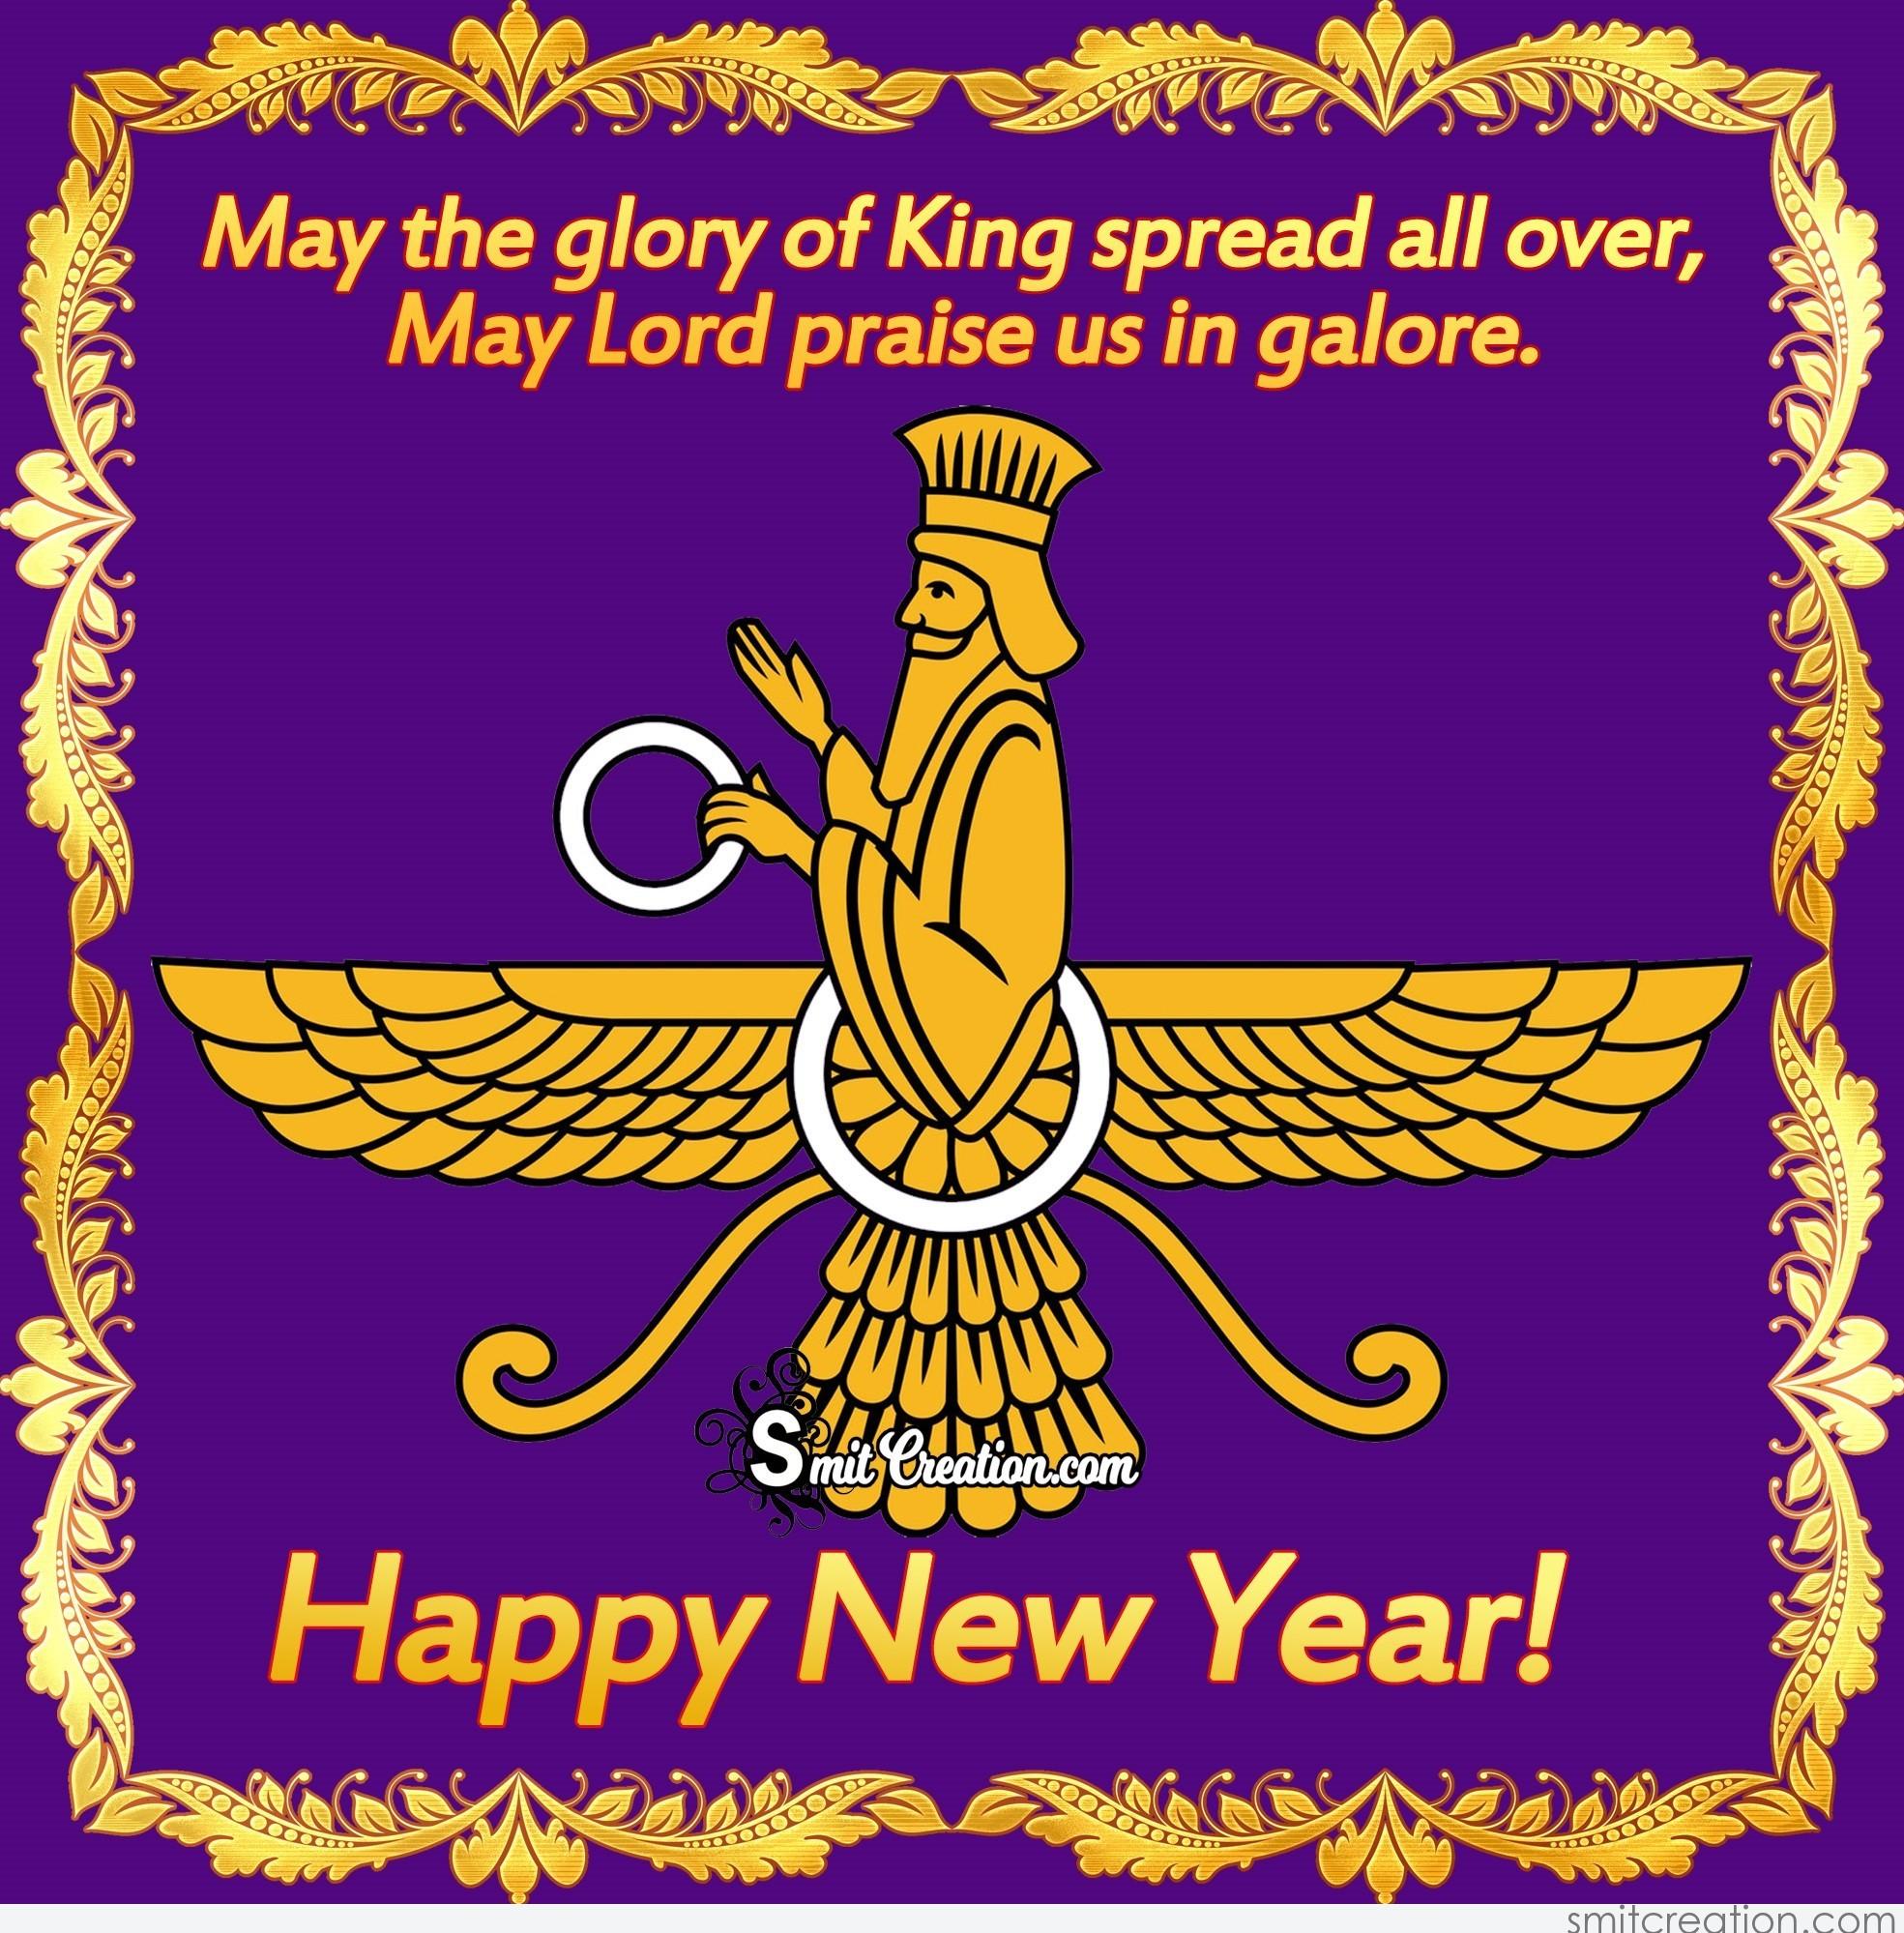 may the glory of kind spread all over, may lord praise us in galore. happyParsi new year